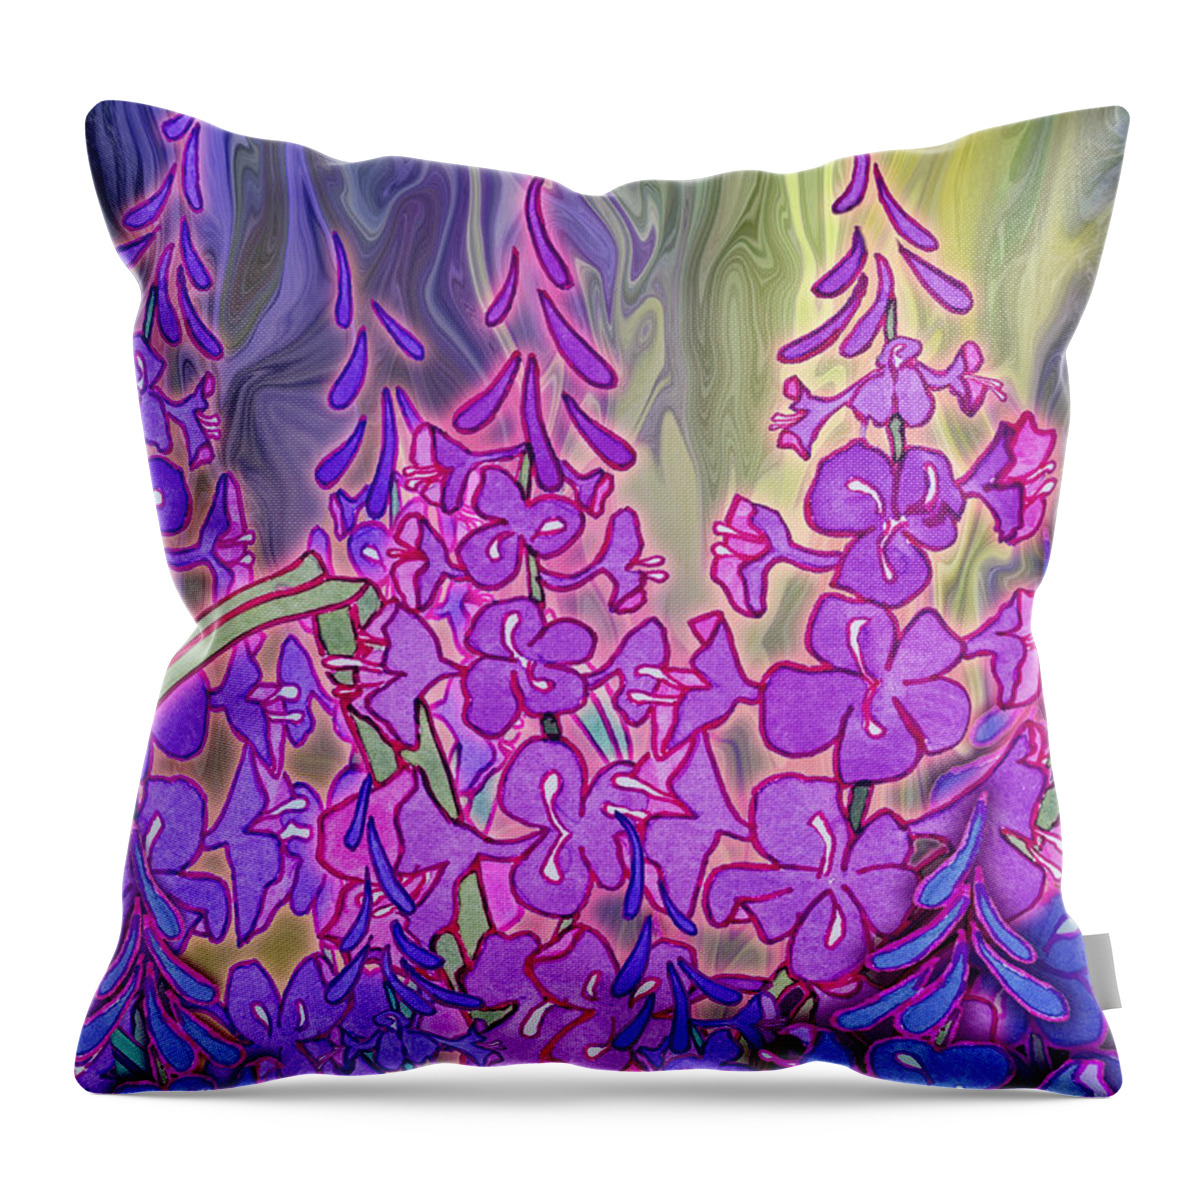 Fireweed Throw Pillow featuring the mixed media Fireweed Medley by Teresa Ascone